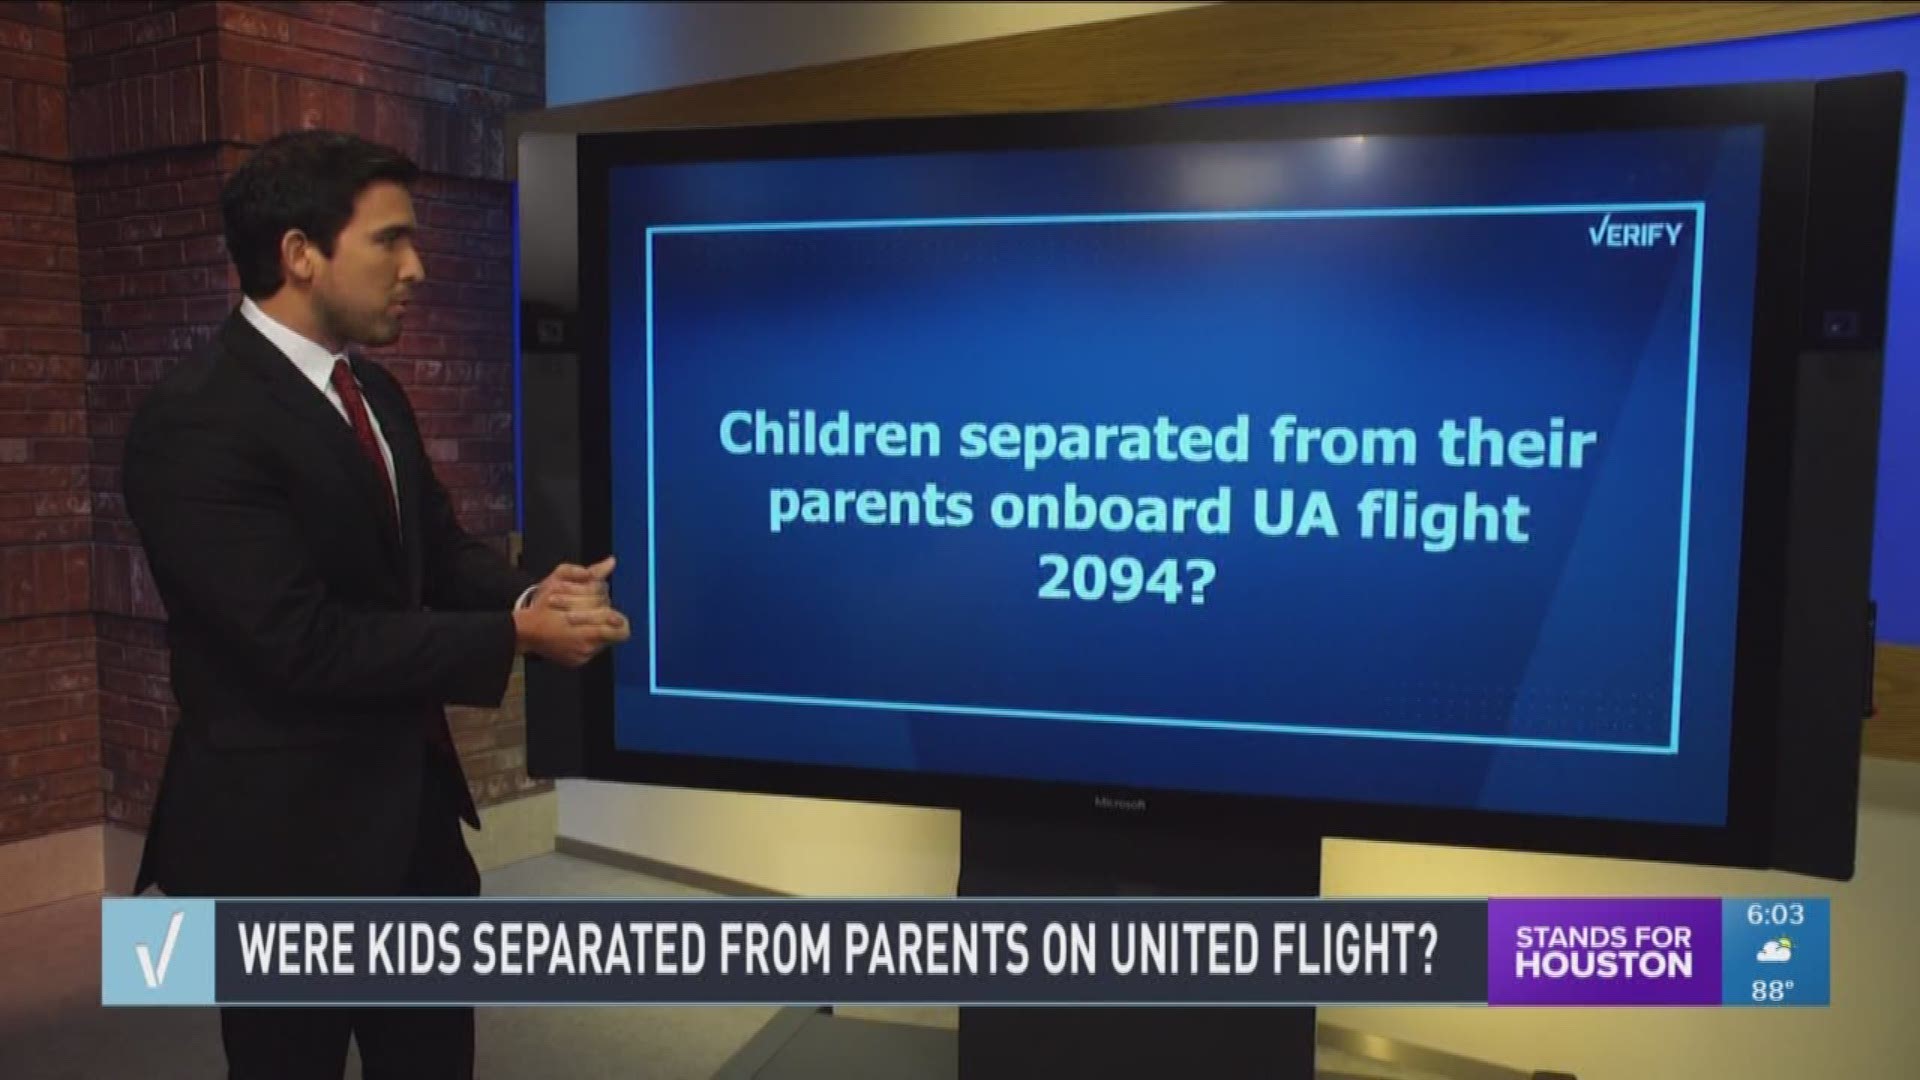 A viral video surfaced that appeared to show United Airlines using one of its flights to separate children from their parents after the airline requested government officials not to. Our KHOU 11 Reporter Marcelino Benito looks into what is true or not. 